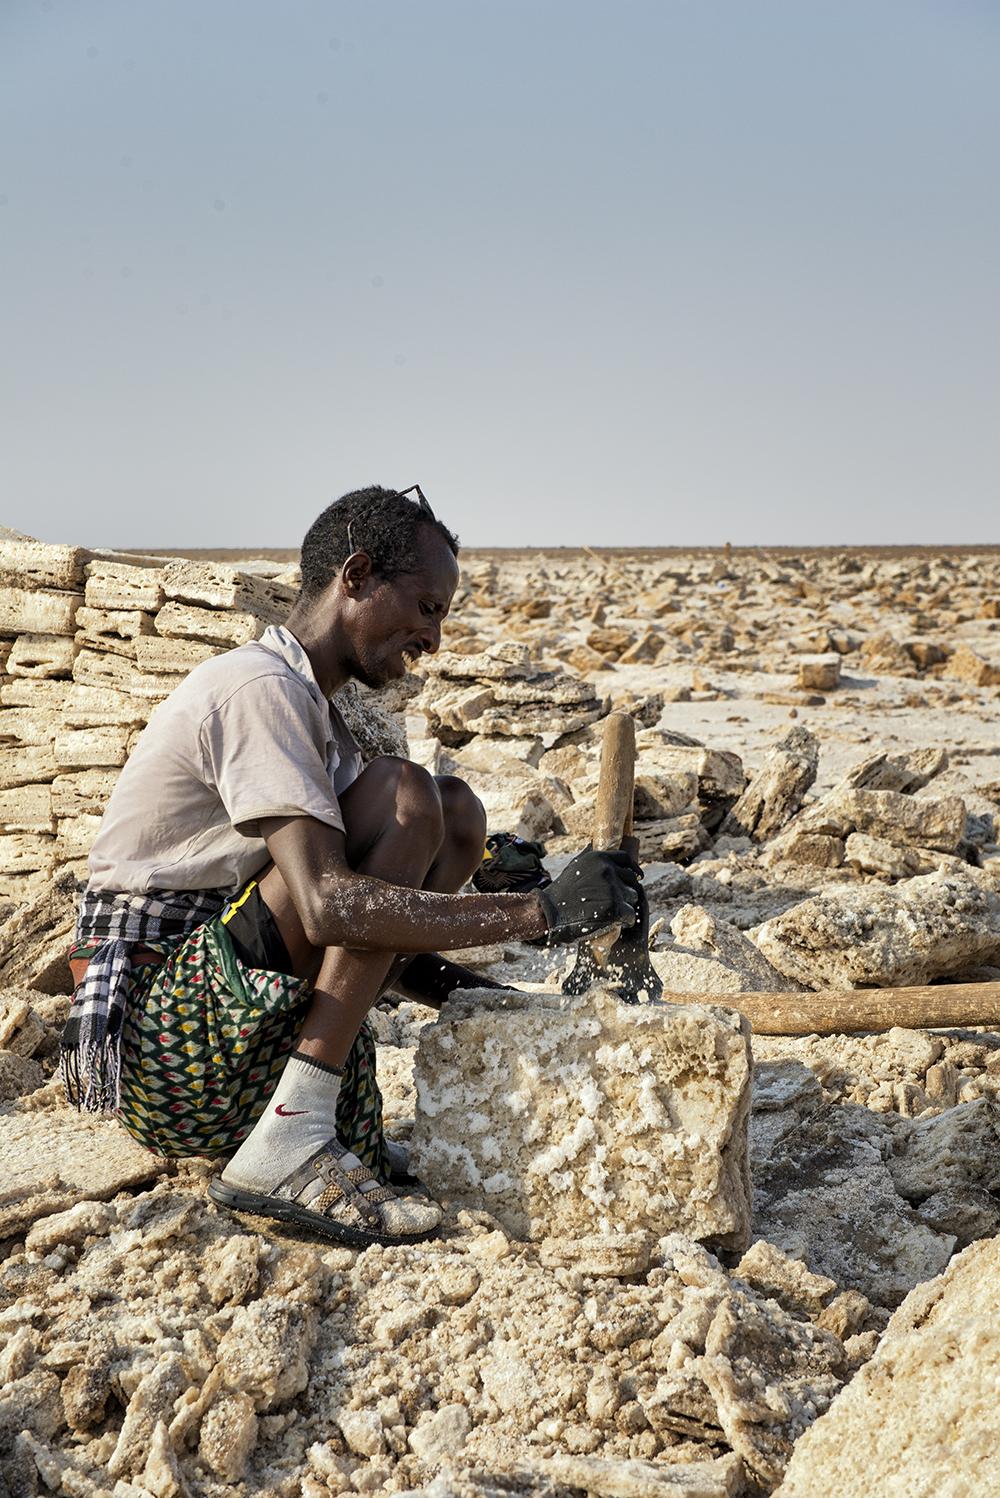 Dispatches from Ethiopia: Salt Miners of the Danakil Depression